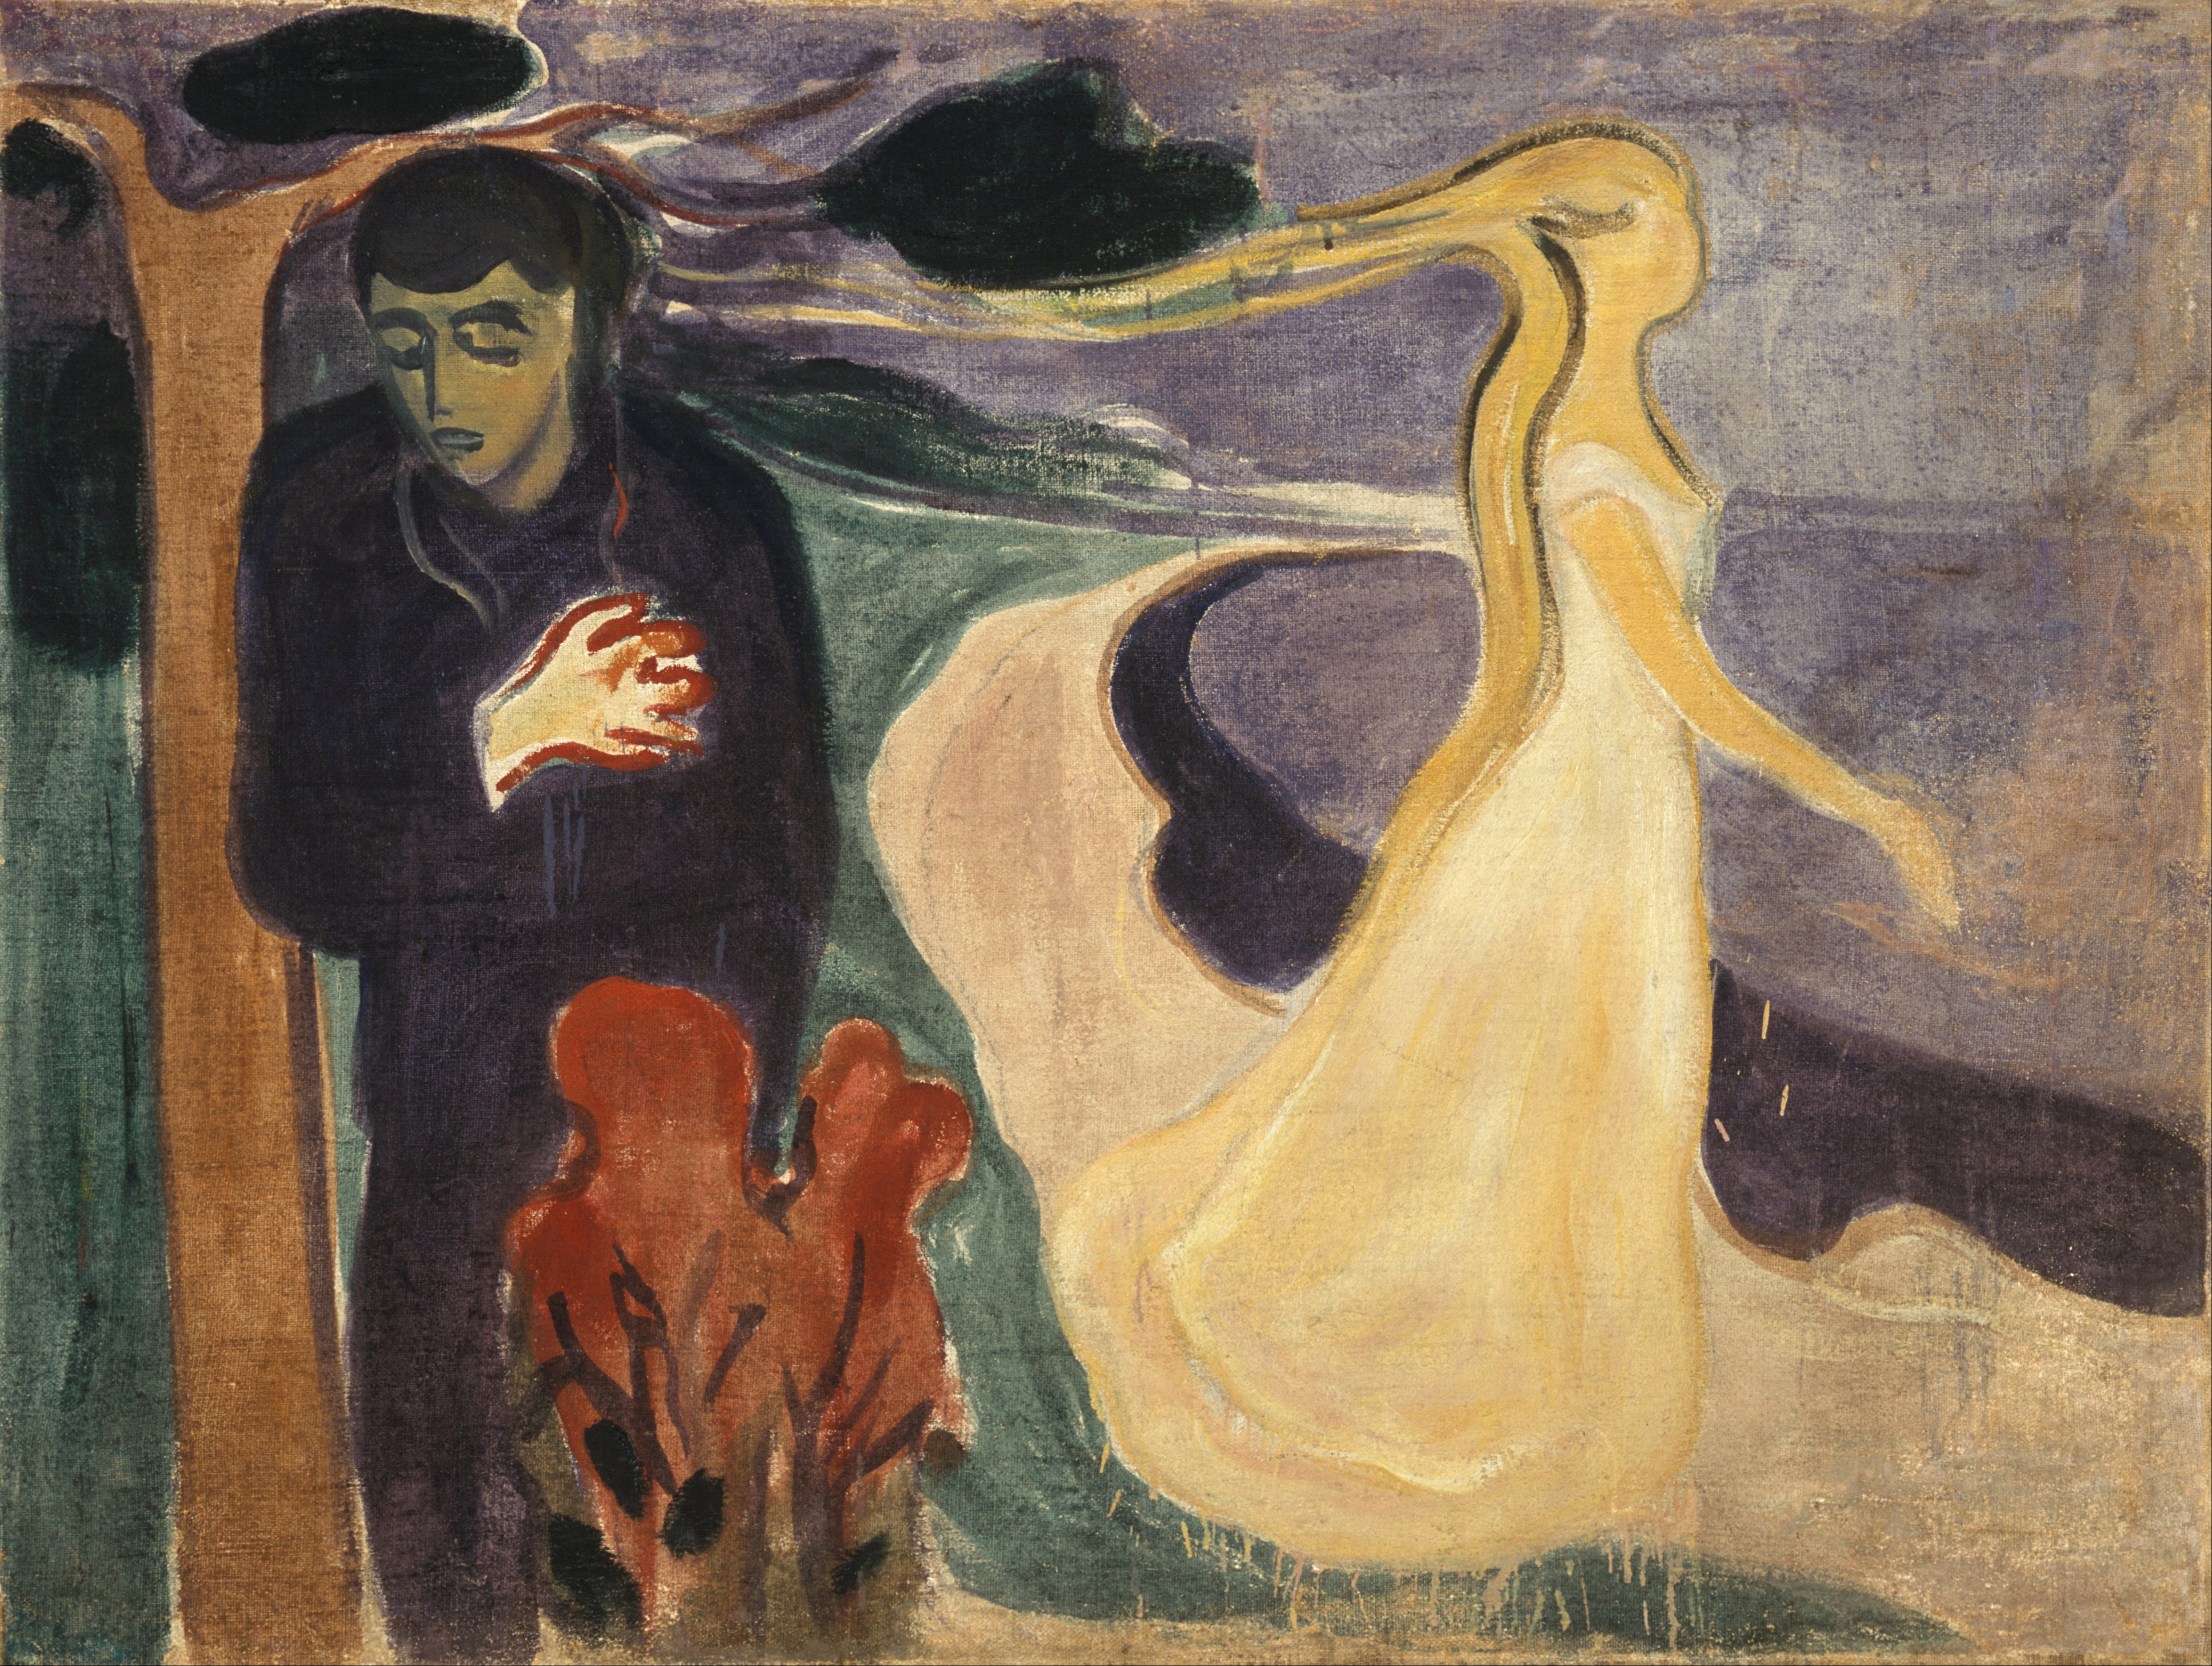 Separare  by Edvard Munch - 1896 - 127 x 96 cm 